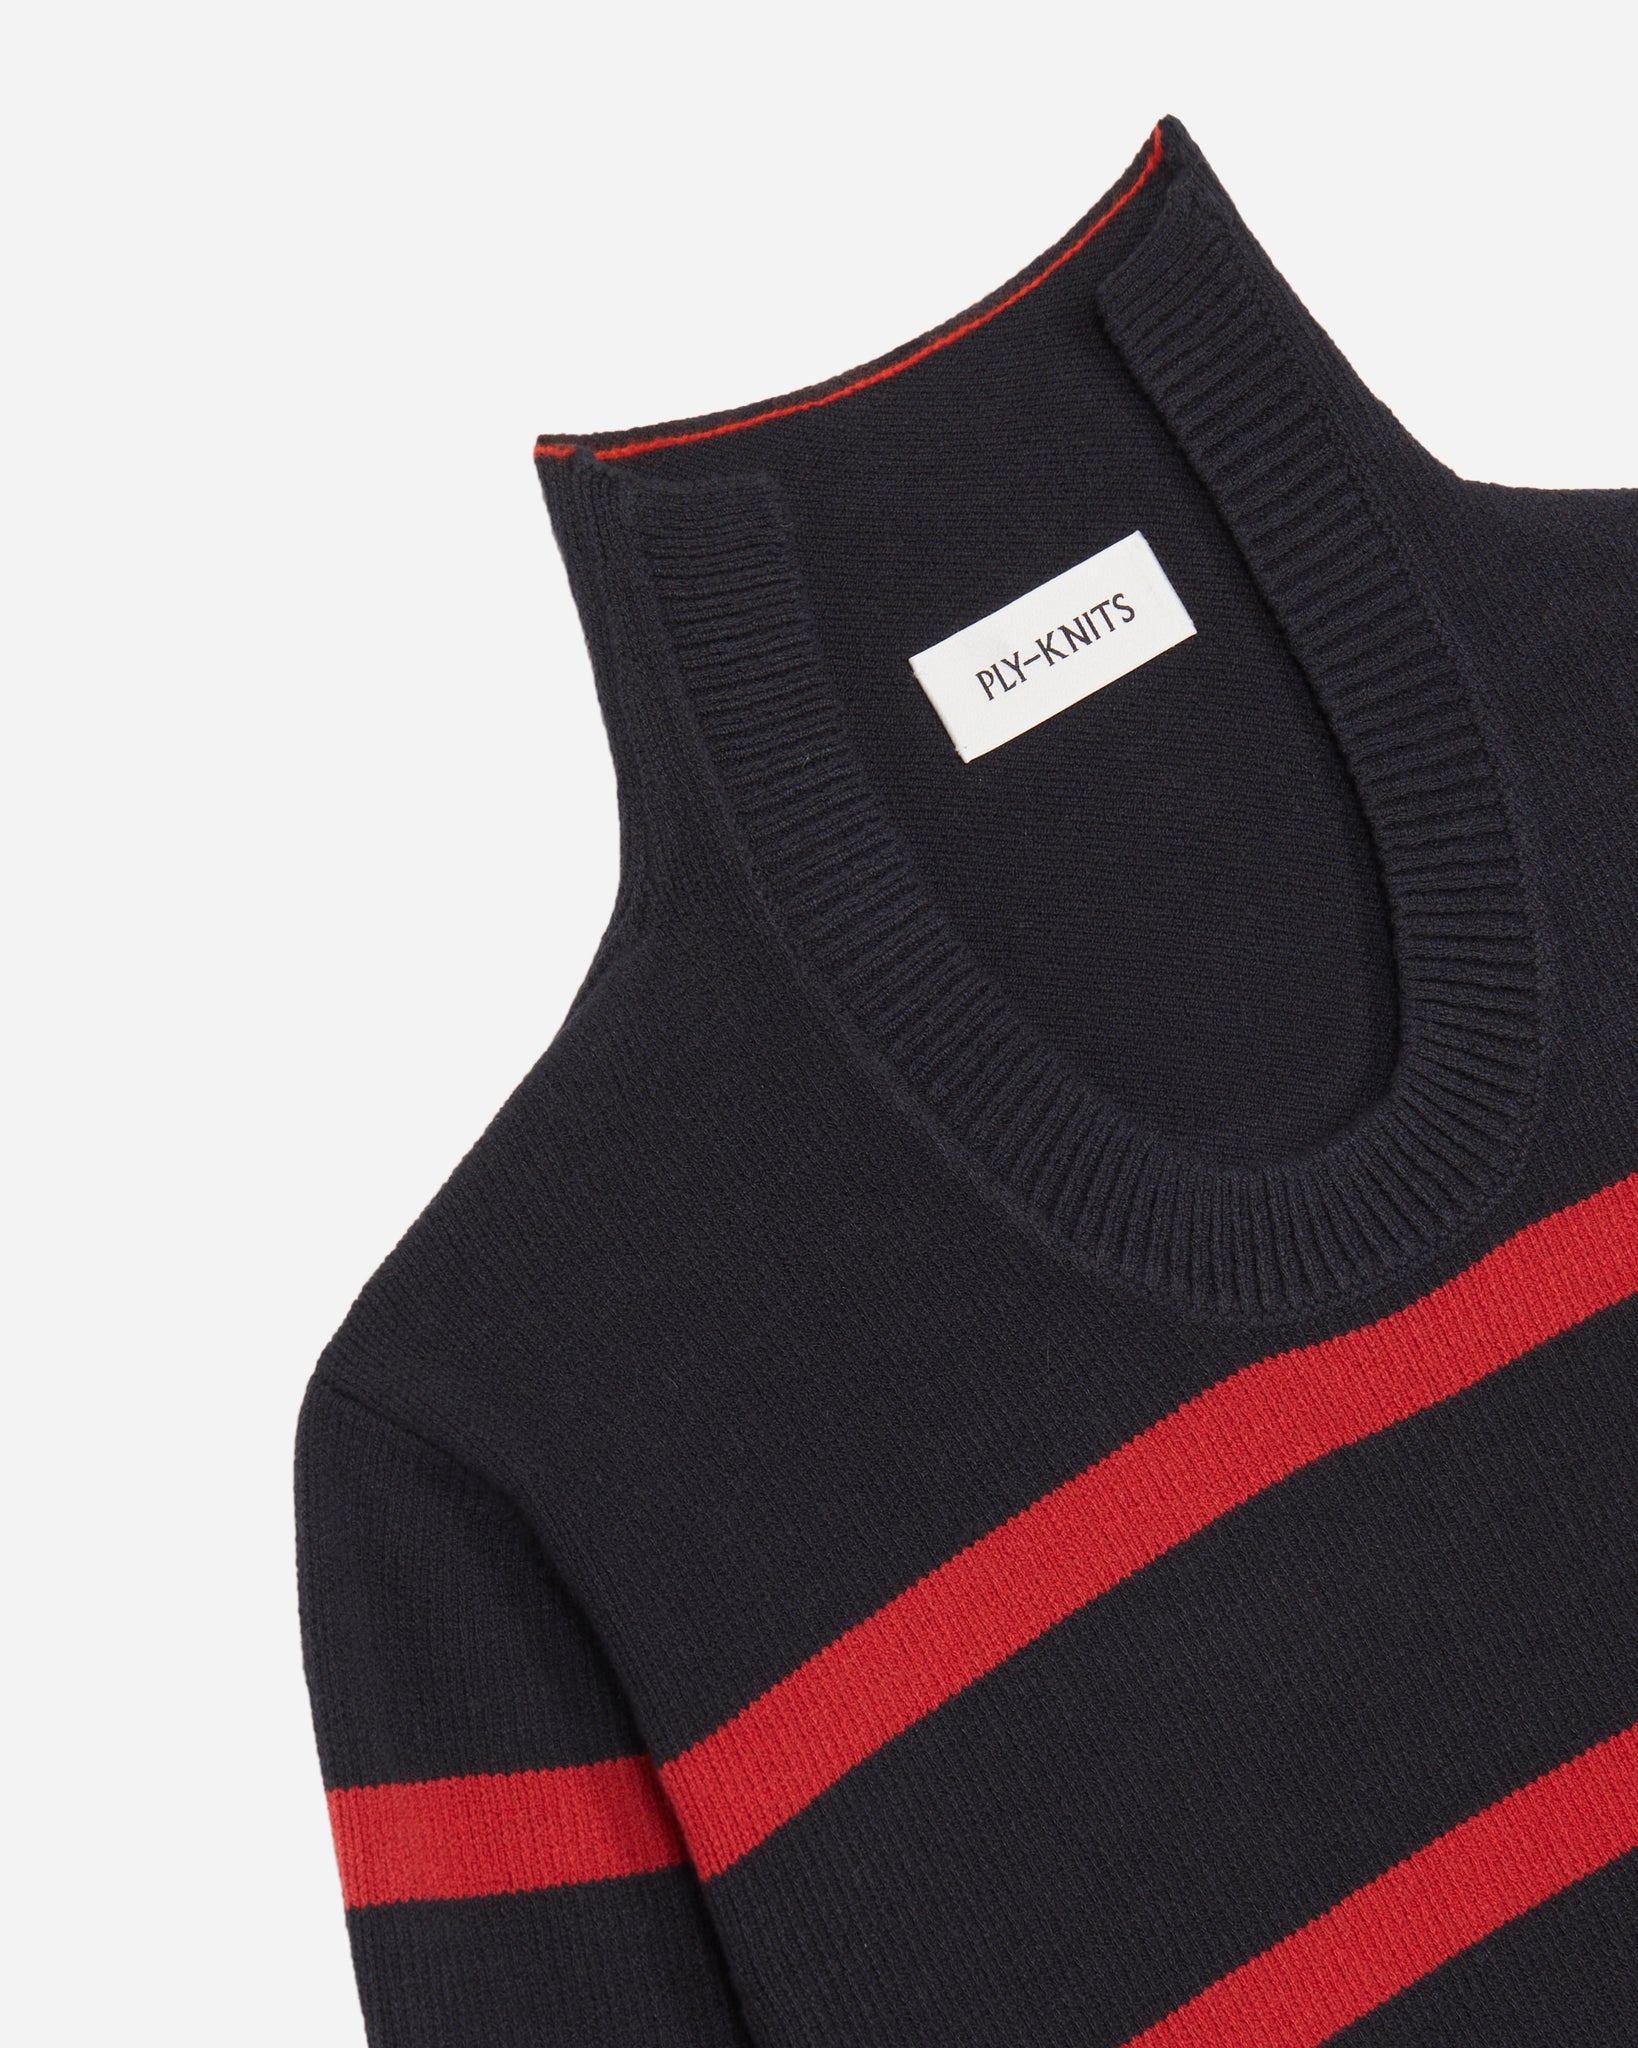 IRENE U-UP COTTON CASHMERE PULLOVER IN NAVY RED NAUTICAL STRIPE